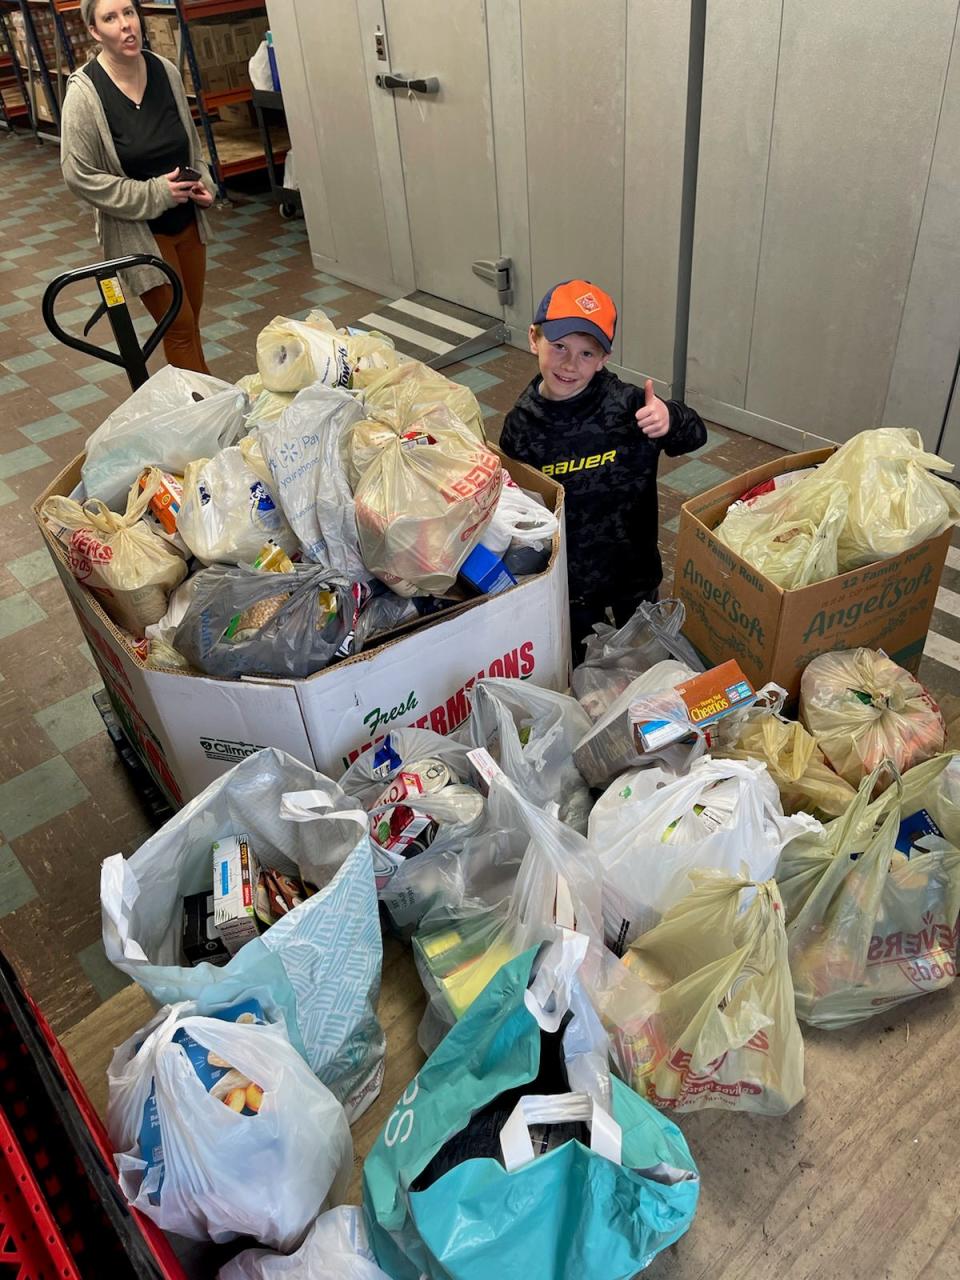 Devils Lake Scouts collected over 1,000 pounds of food for w worthy cause this past week thanks to support from the local community.